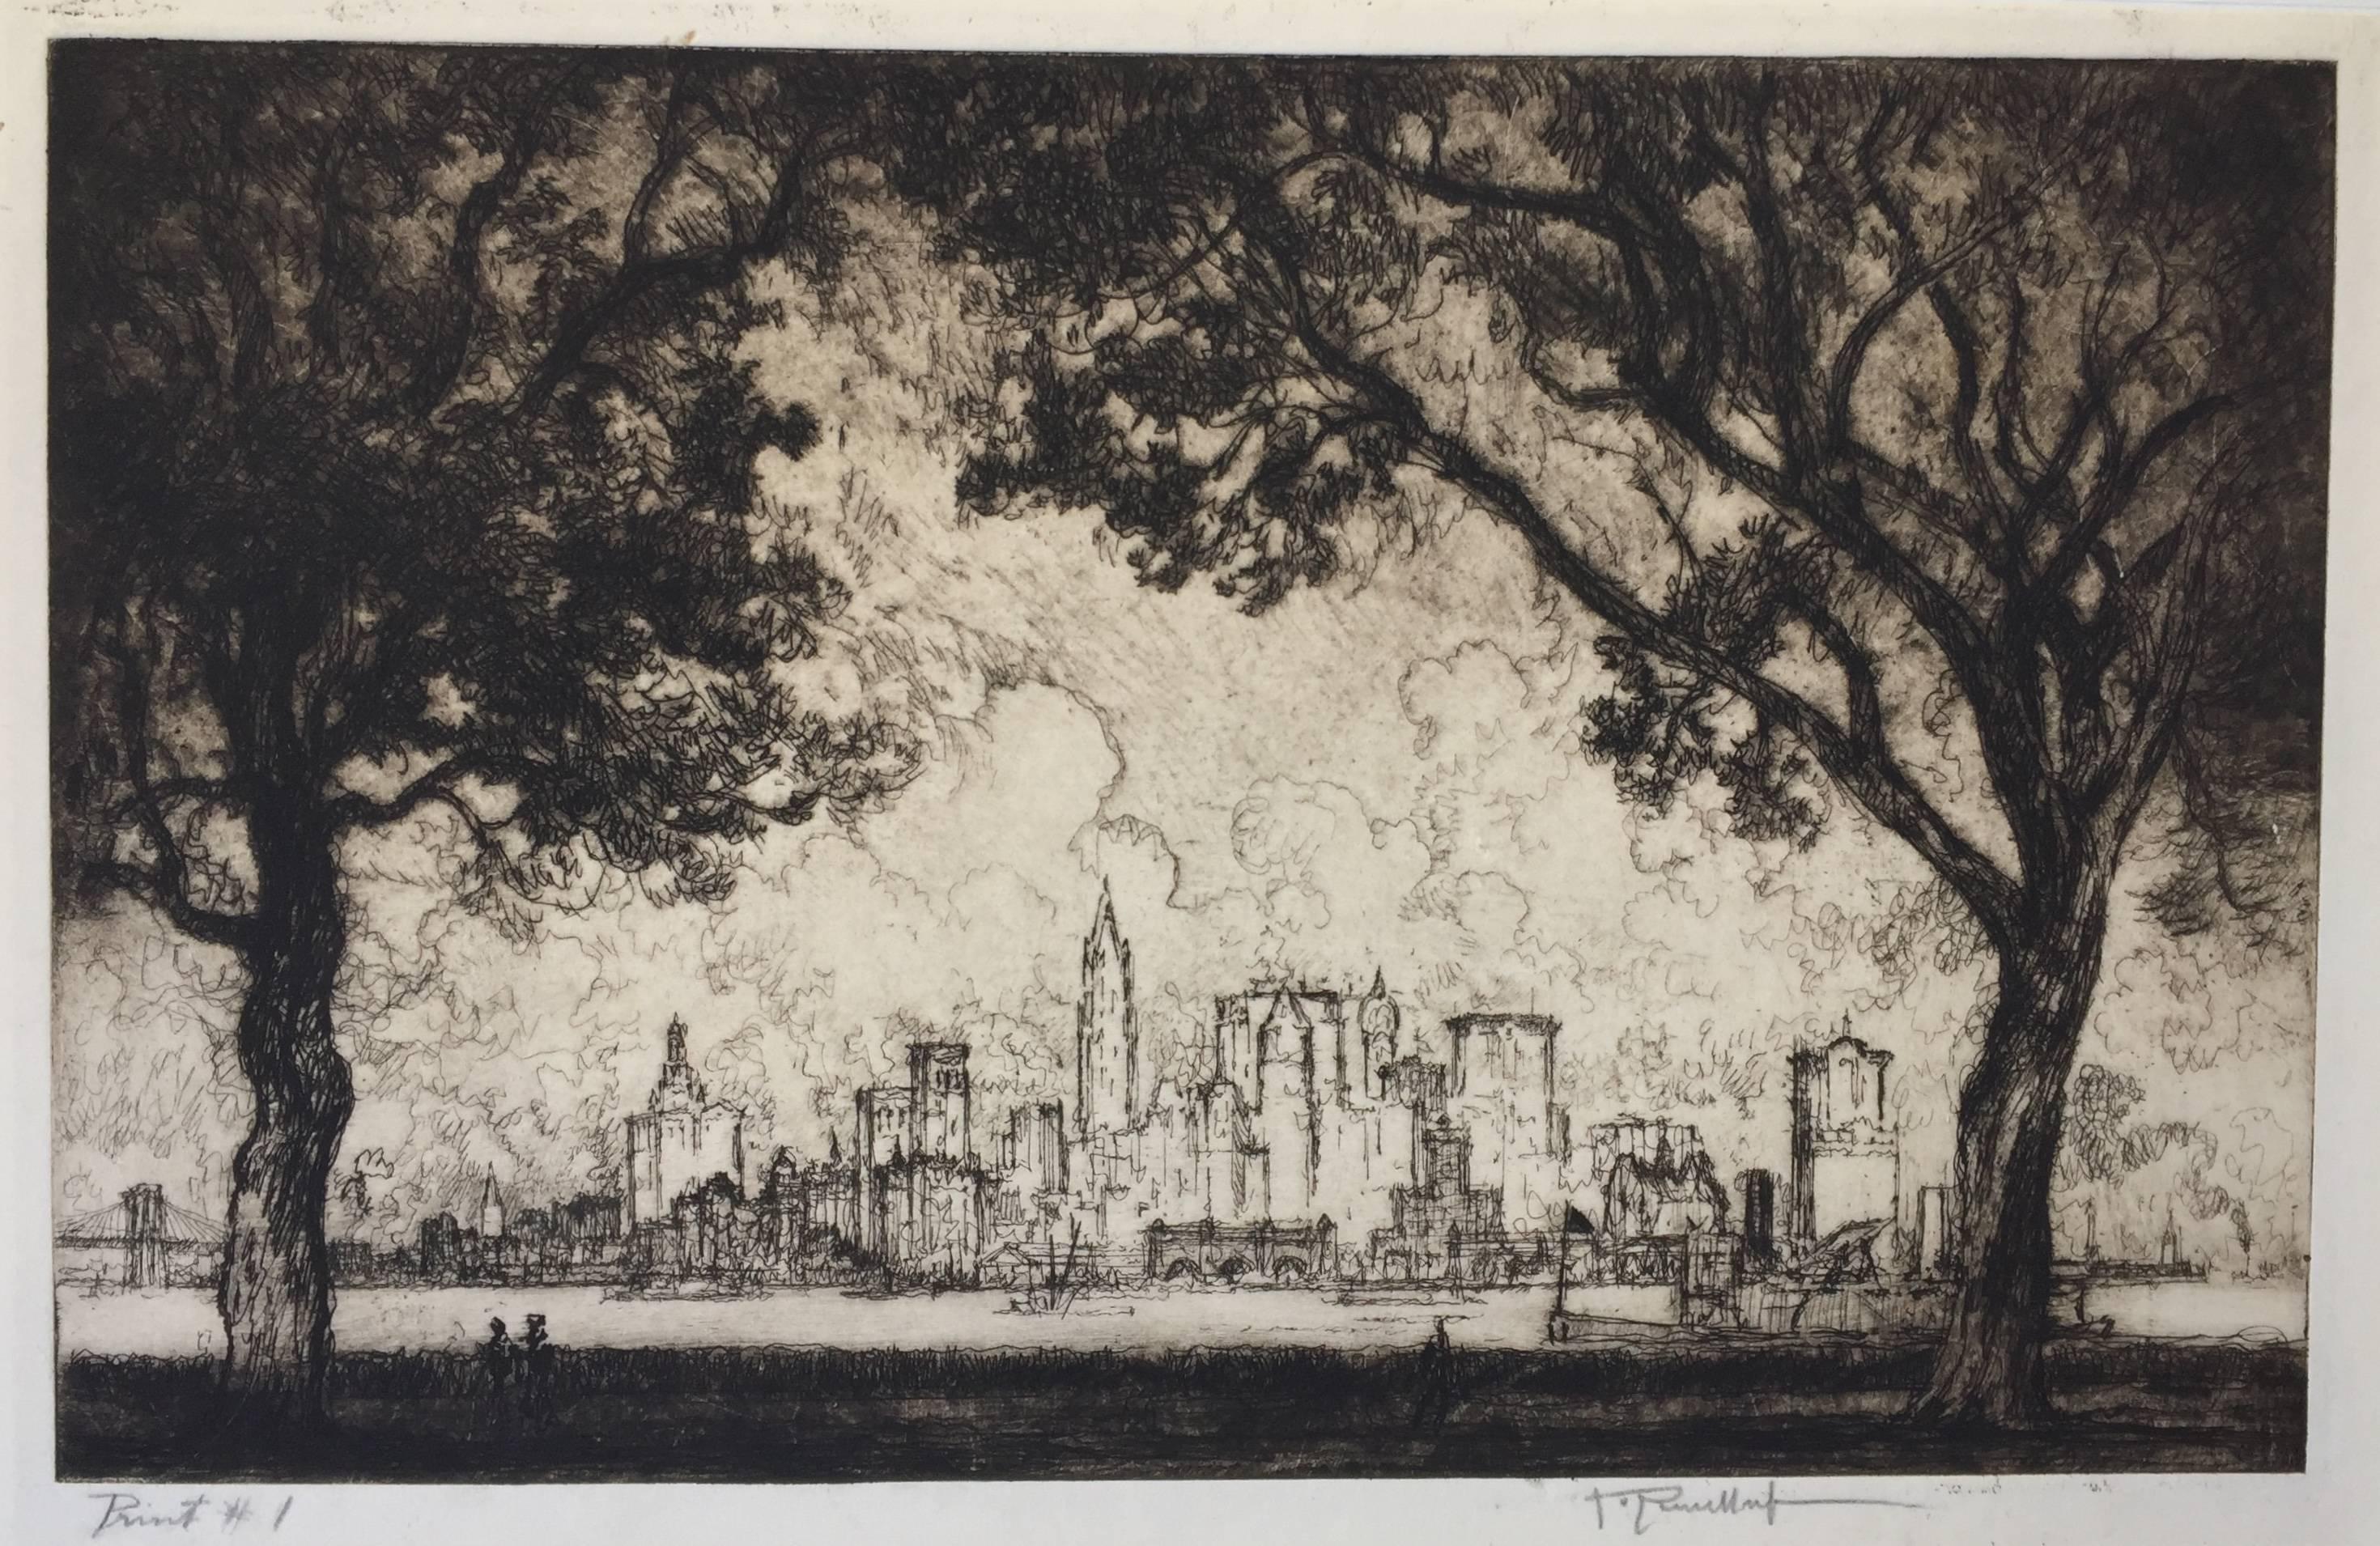 Joseph Pennell Landscape Print - NEW YORK FROM GOVERNOR'S ISLAND